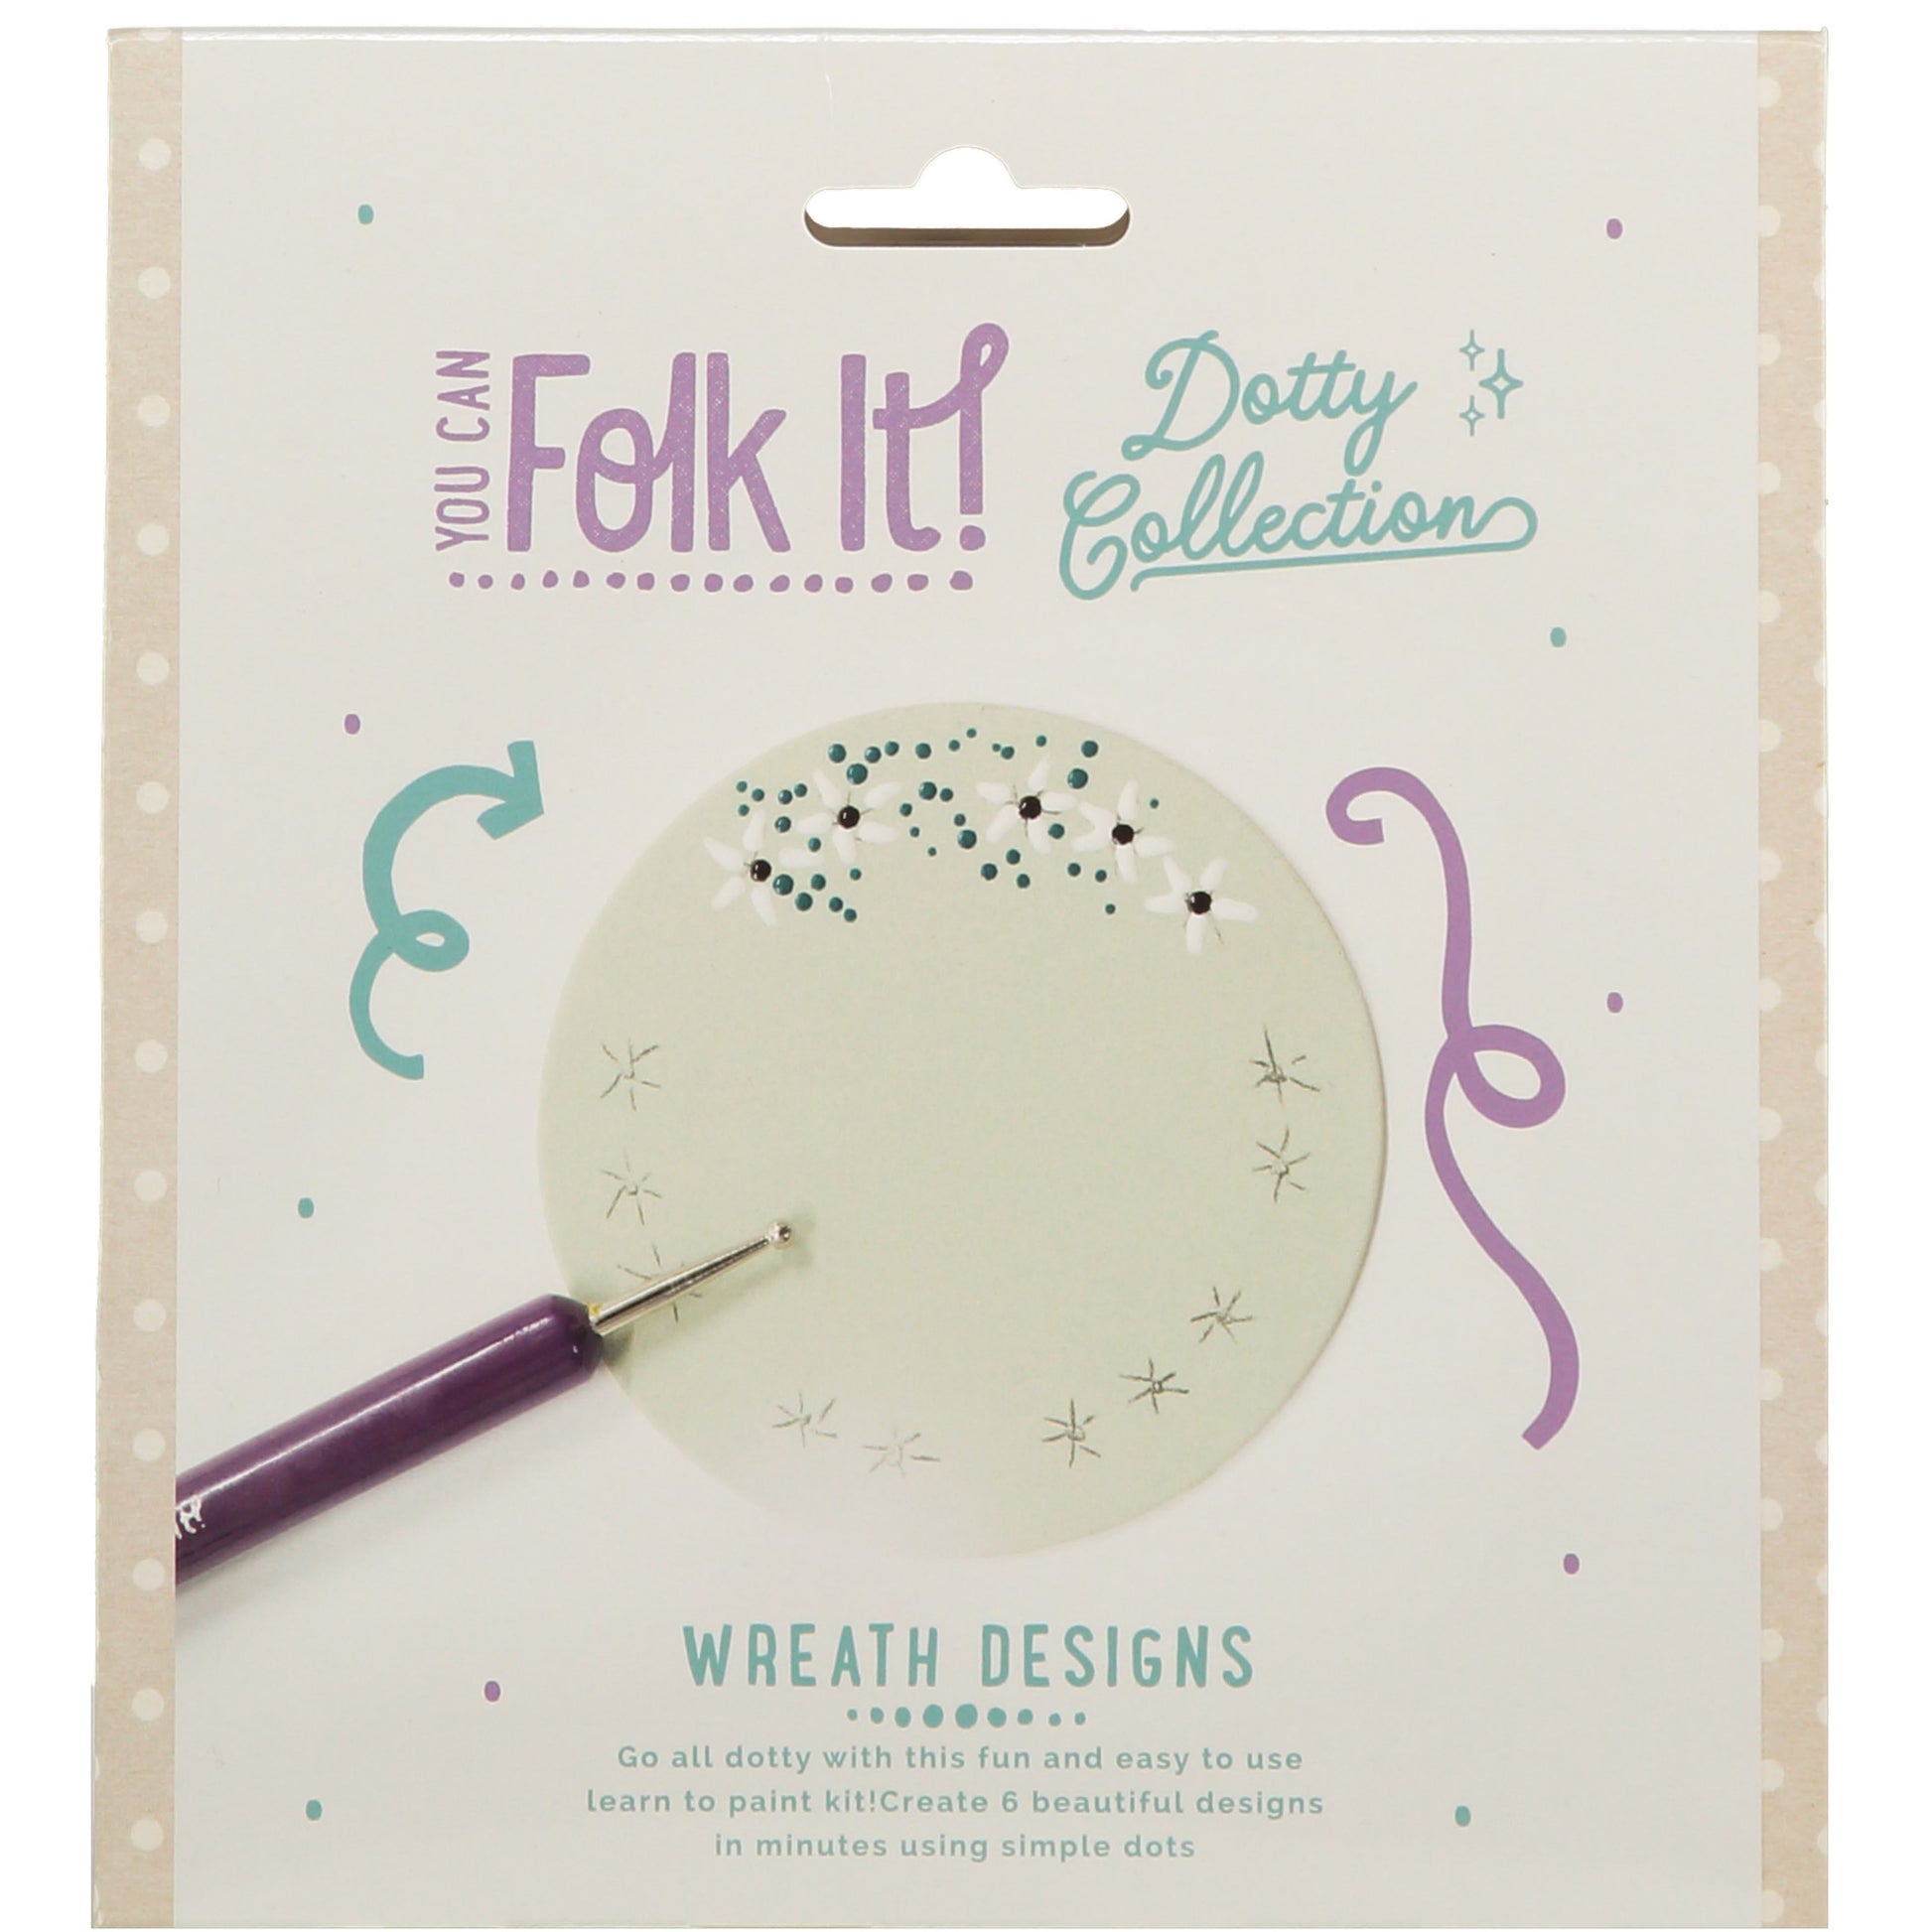 One of 6 designs taught in You Can Folk It's Dotty collection wreath kit - a fun painting kit for adults and children